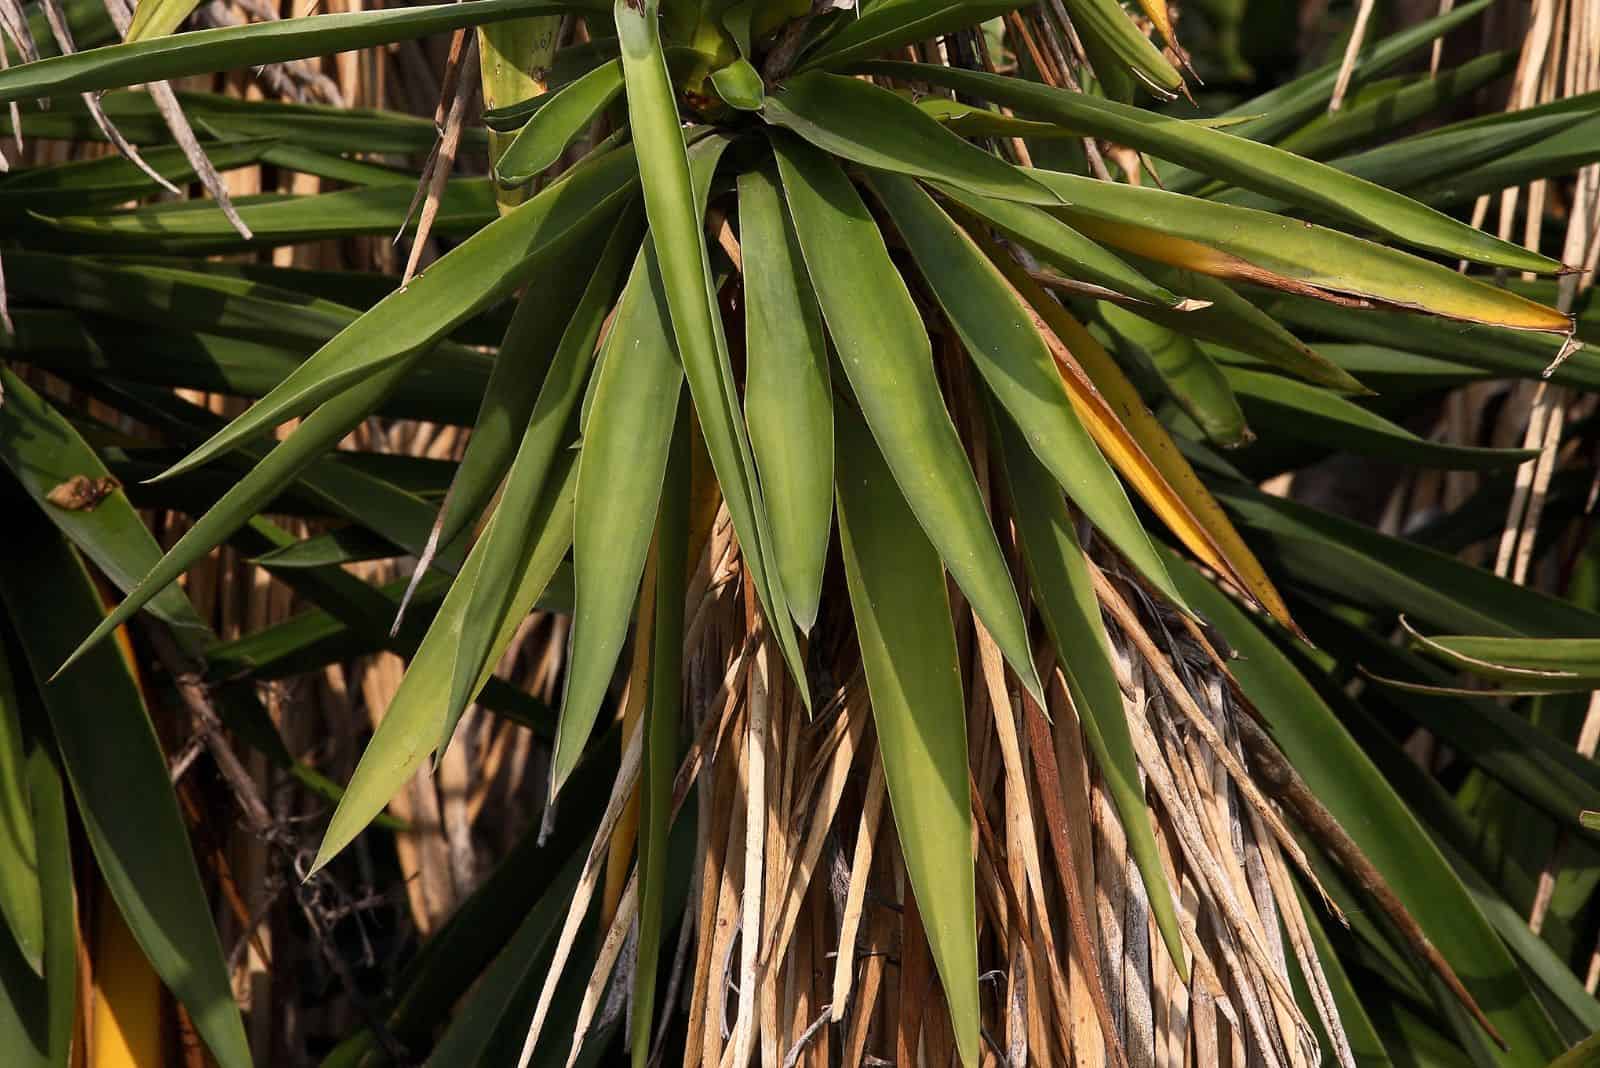 Spineless yucca that dries